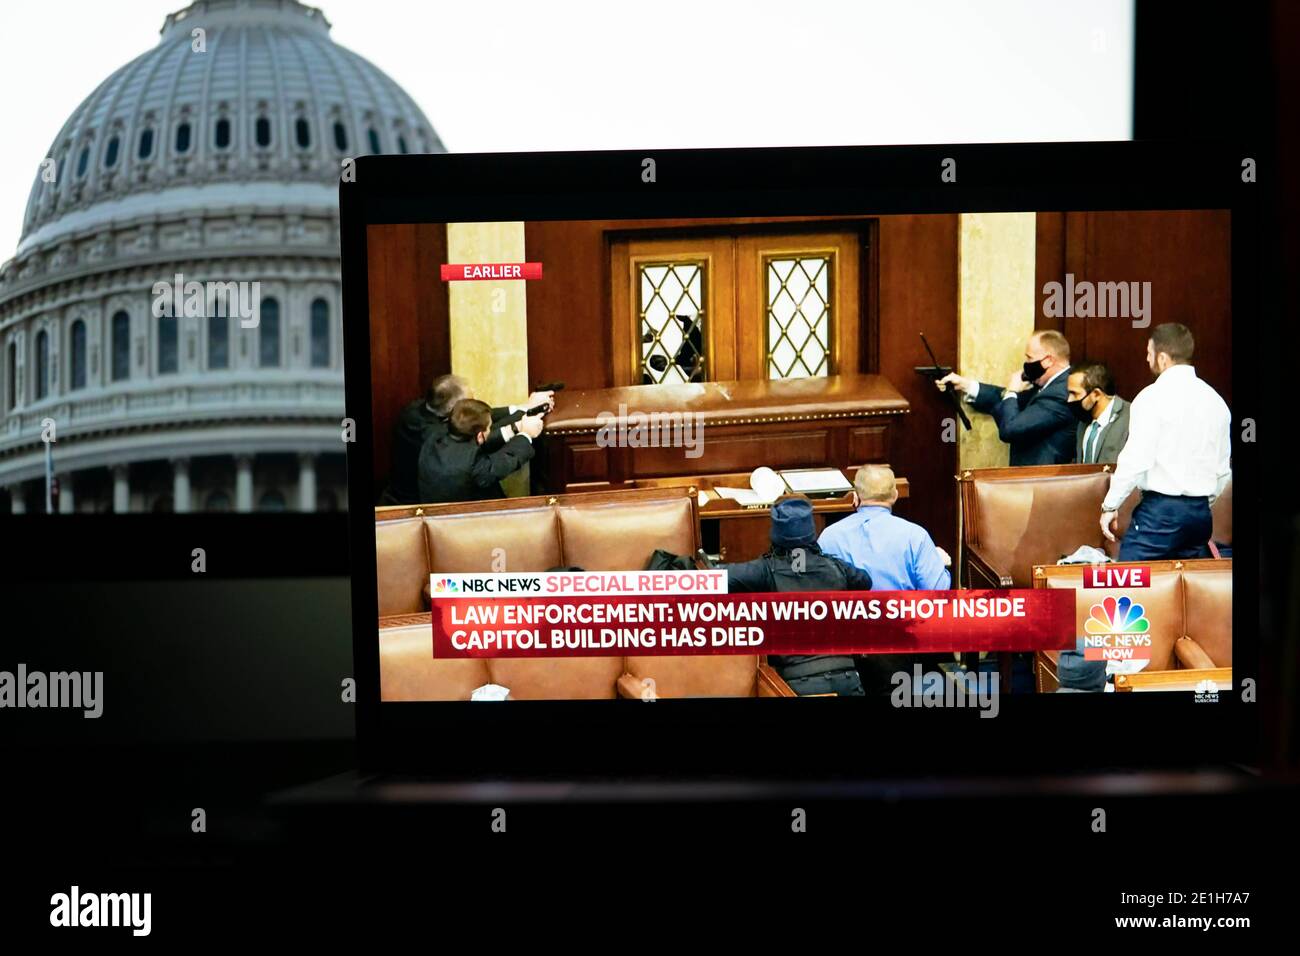 Washington, USA. 7th Jan, 2021. The moment of security staff in the U.S. Capitol building reacting to the chaotic situation is captured on a screenshot in a video feed from NBC news seen in Arlington, Virginia, the United States, Jan. 6, 2021. Credit: Liu Jie/Xinhua/Alamy Live News Stock Photo